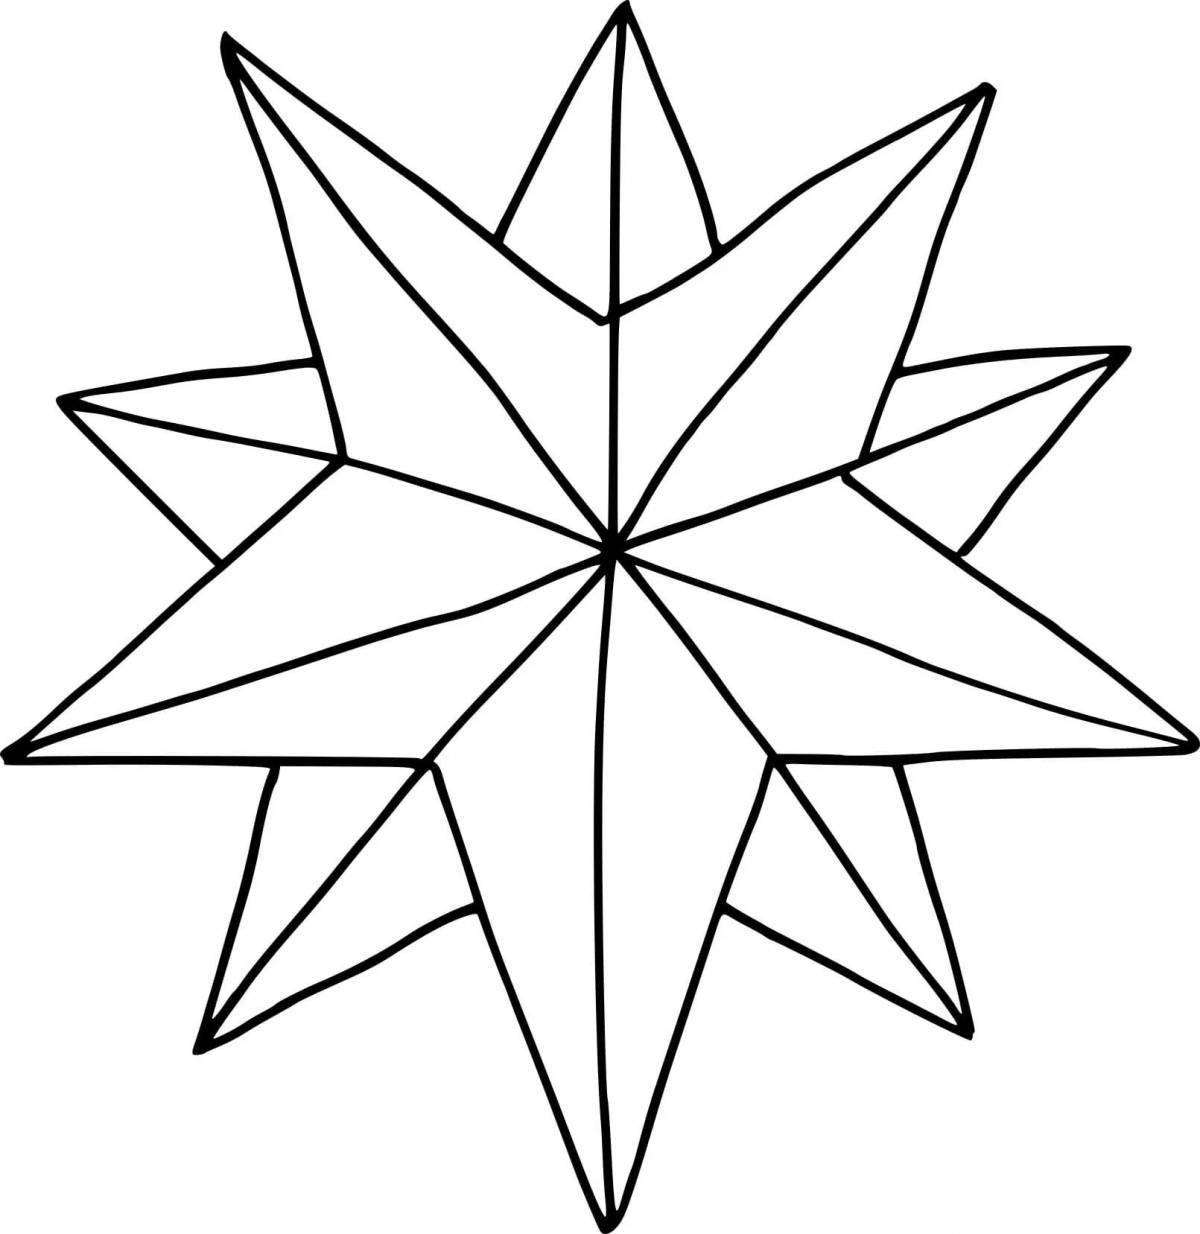 Rampant Christmas star coloring pages for kids